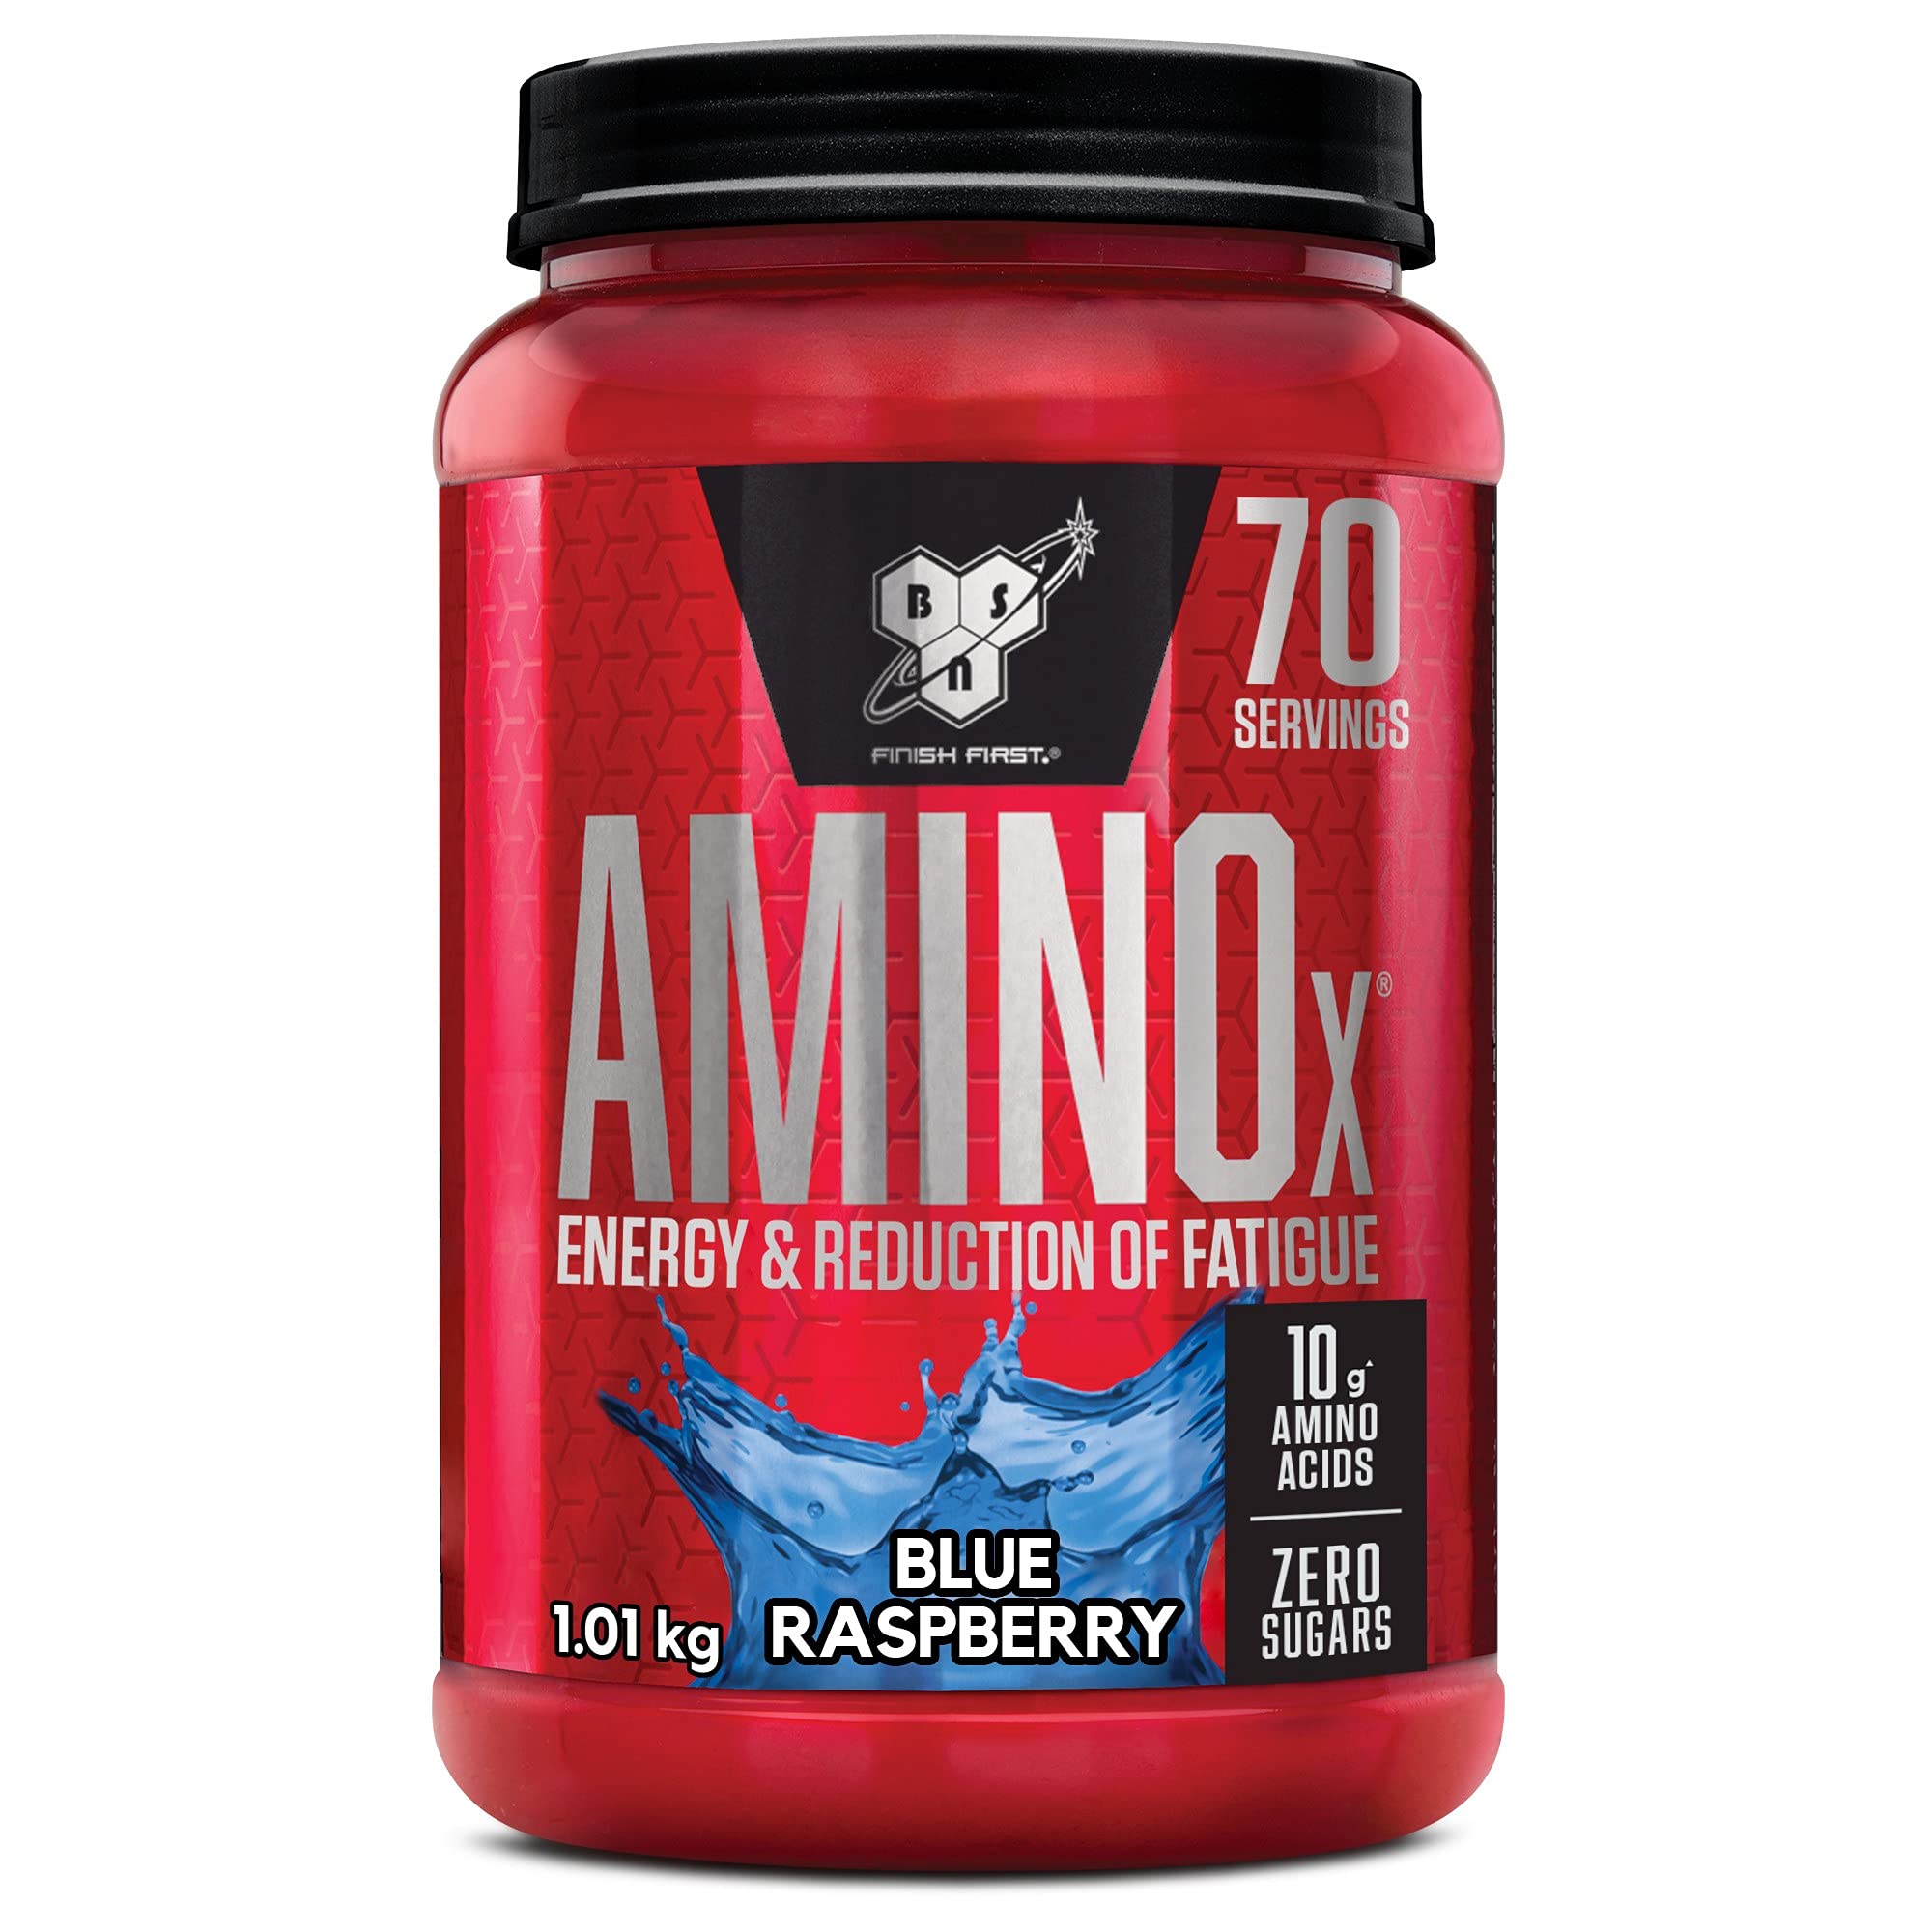 BSN Nutrition Amino X Energy and Reduction of Fatigue Blue Raspberry, 1.01kg, 70 Servings